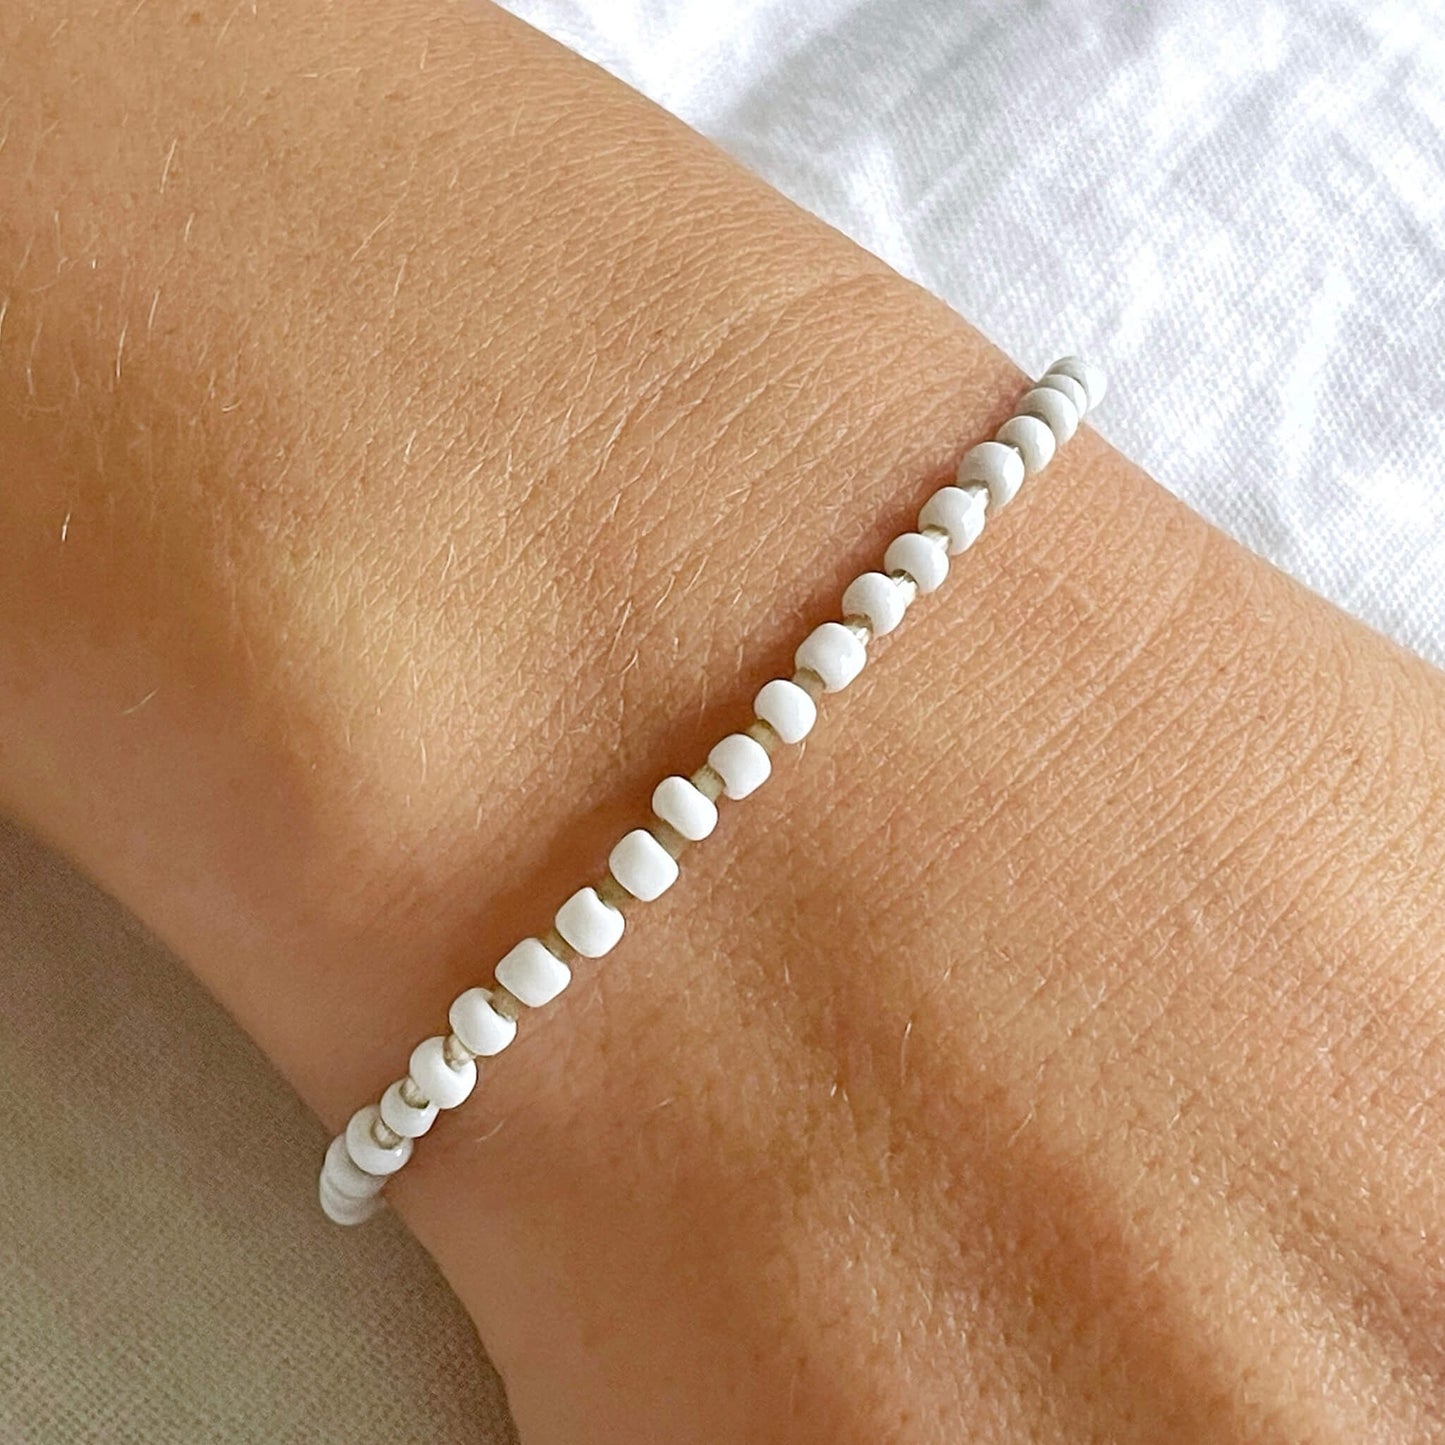 white and beige beaded bracelet worn on the wrist